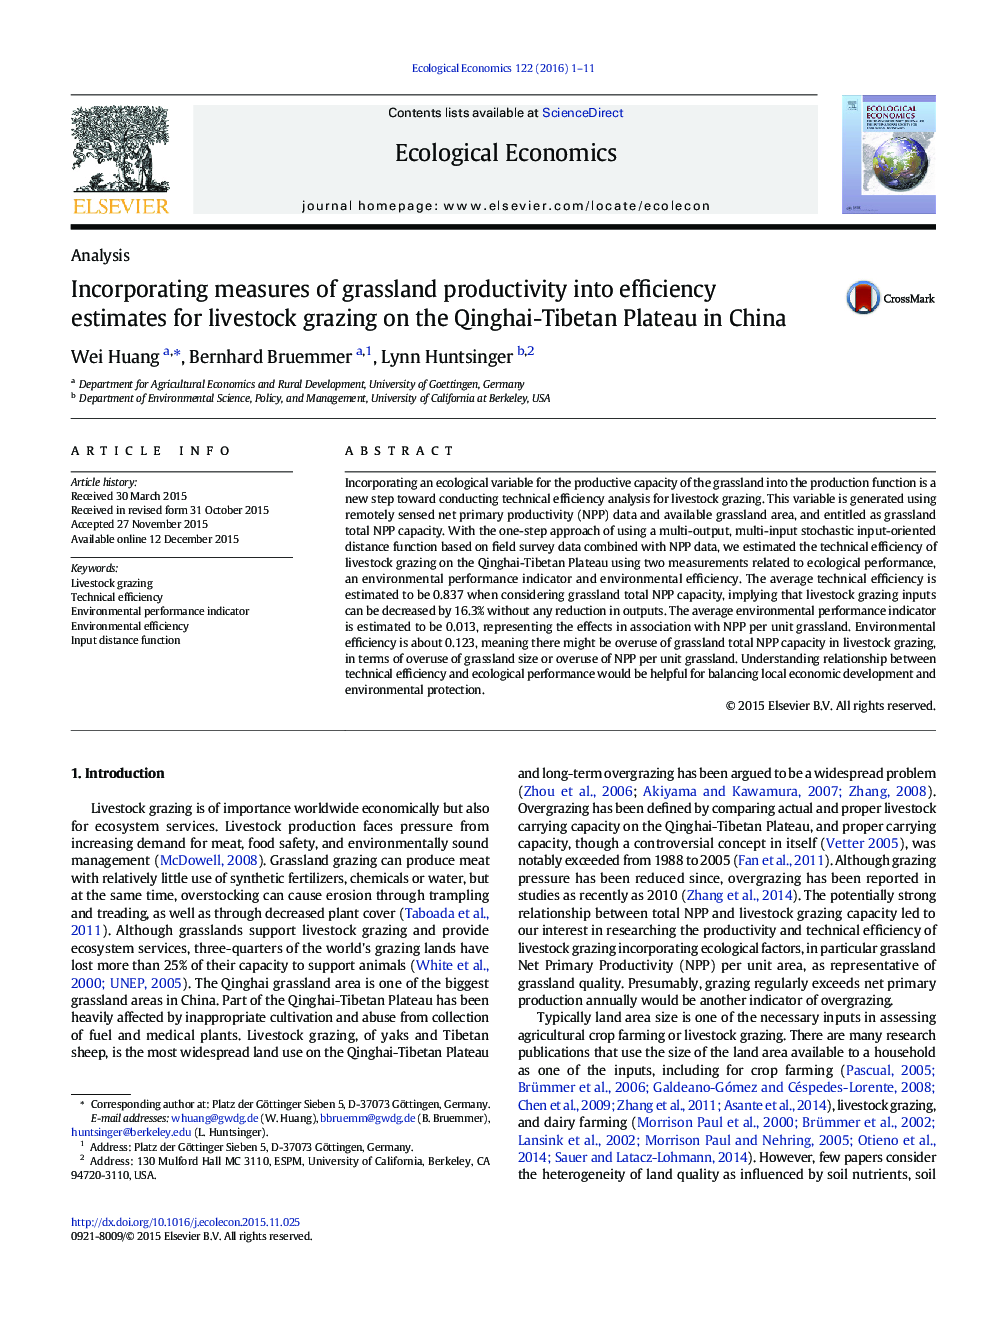 AnalysisIncorporating measures of grassland productivity into efficiency estimates for livestock grazing on the Qinghai-Tibetan Plateau in China